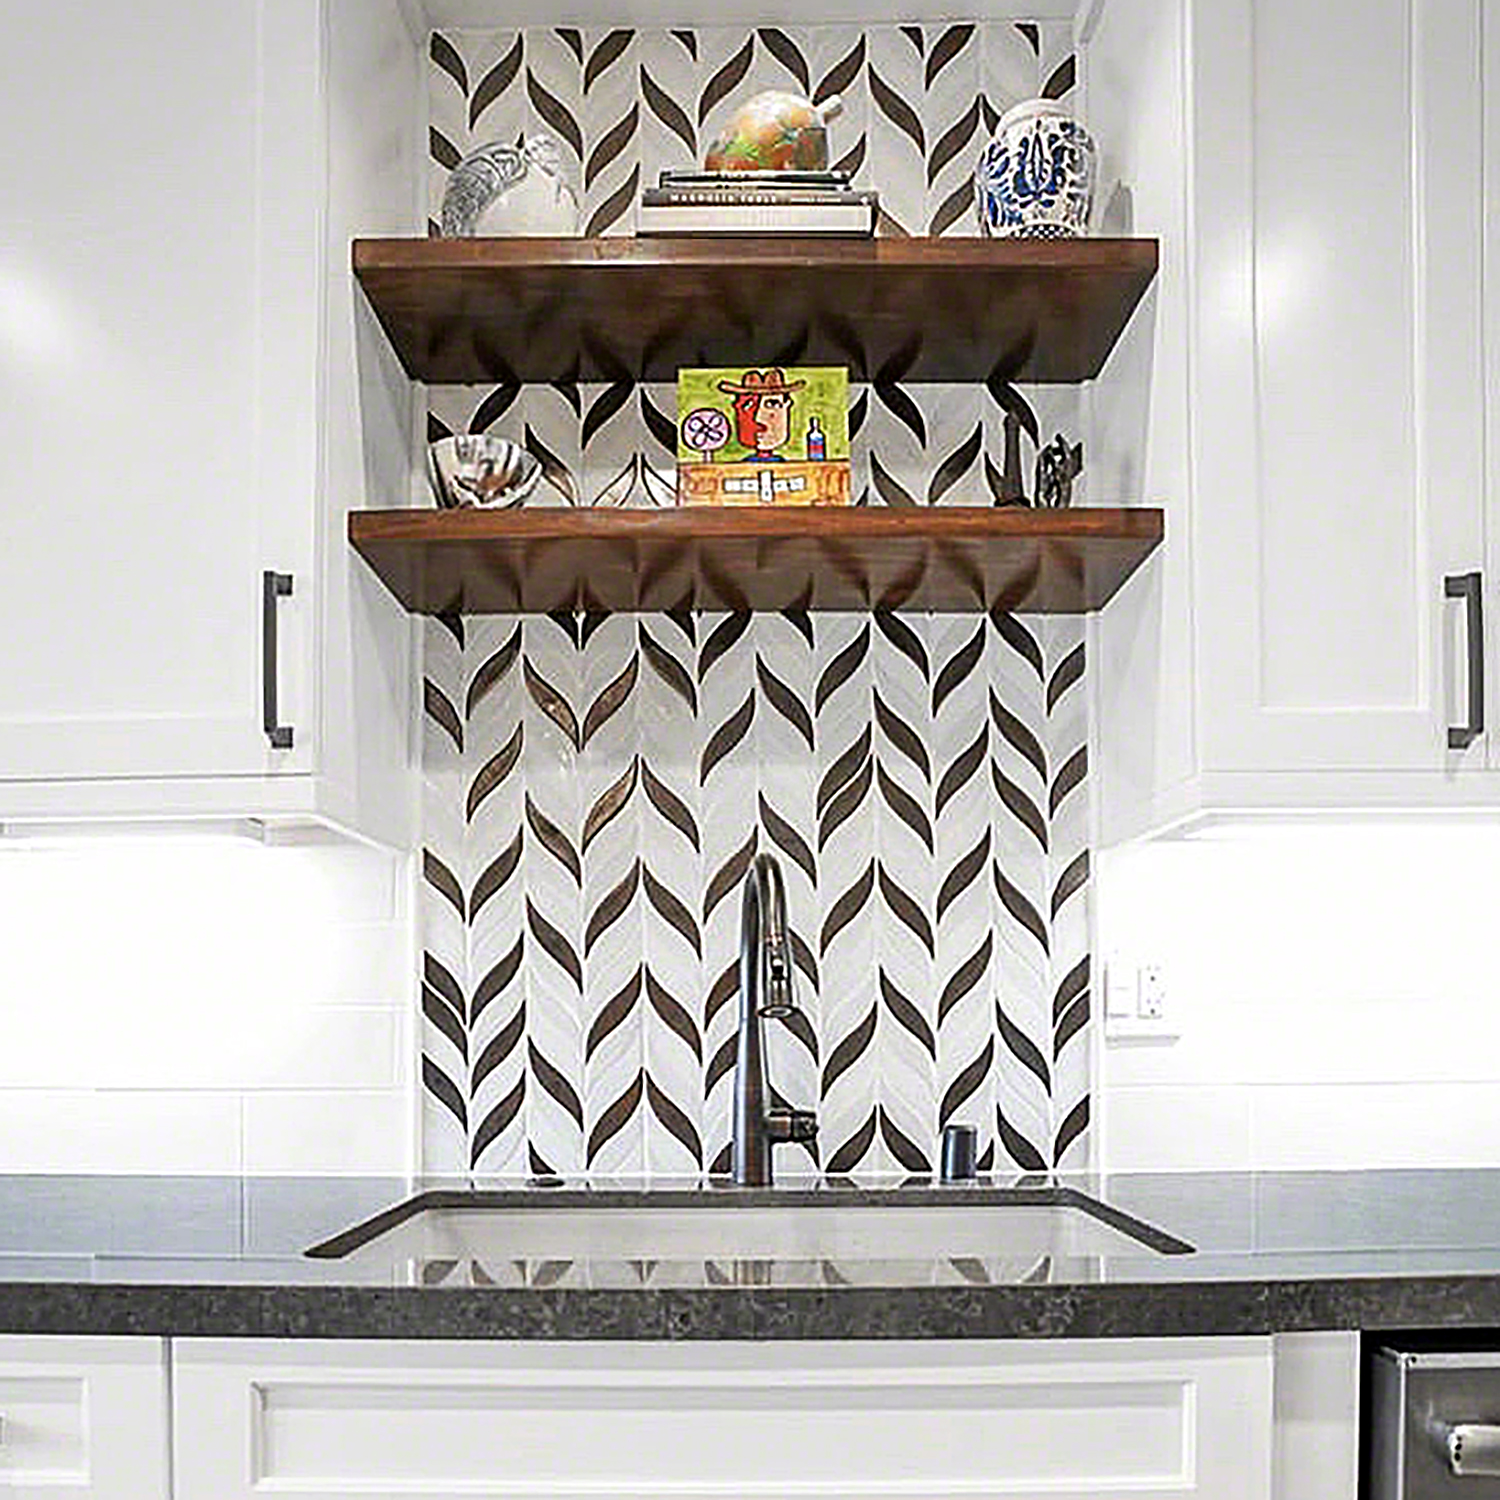 Five Types Of Kitchen Open Shelving Which One Fits Your Kitchen